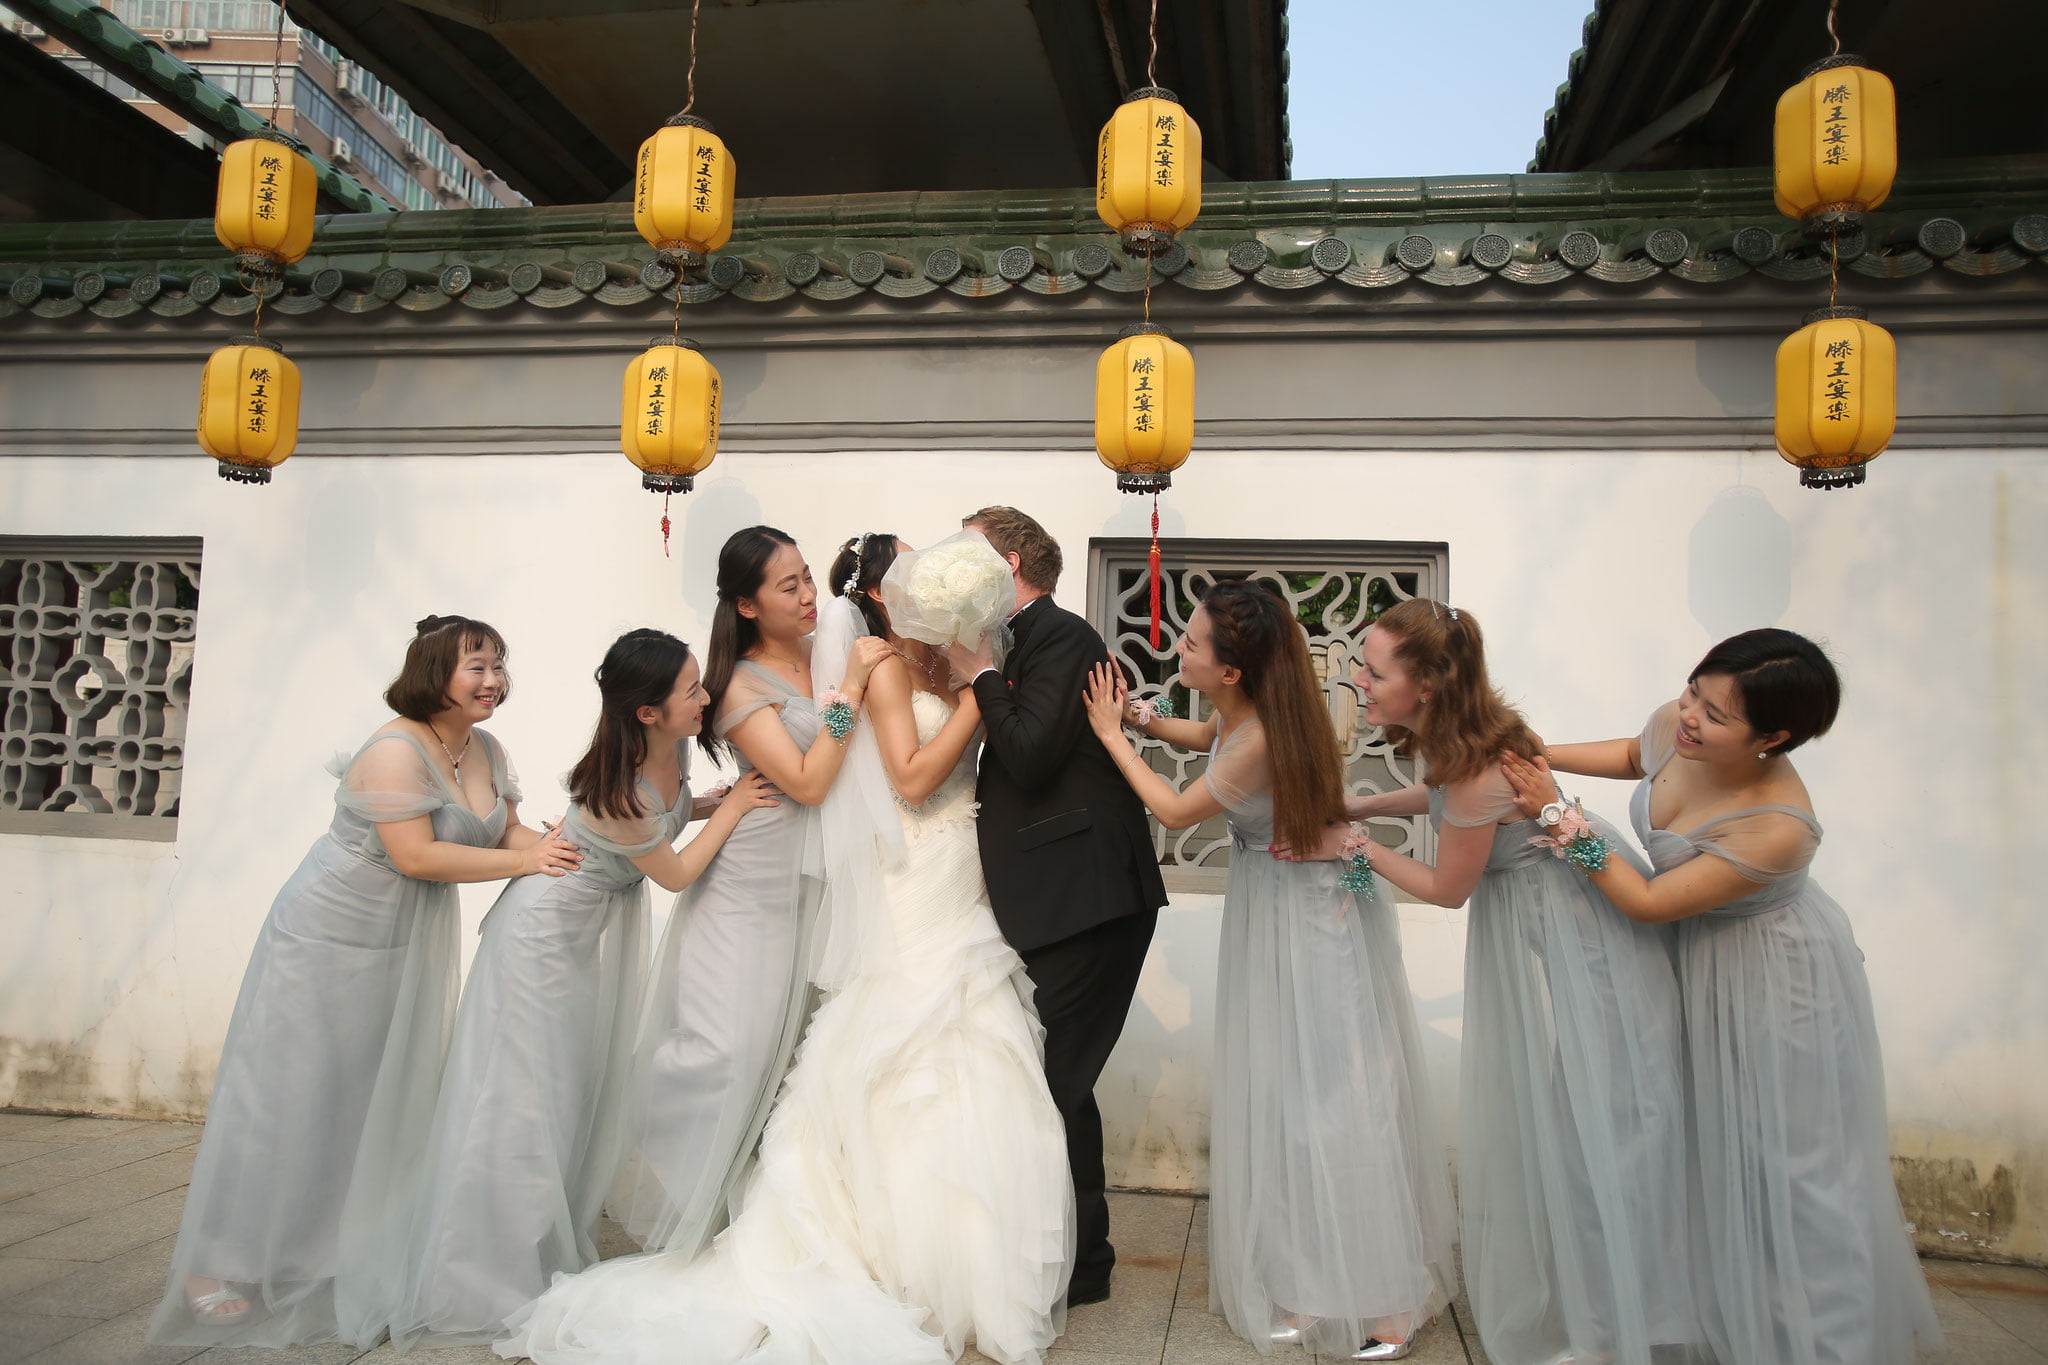 Our Wedding in a Chinese city